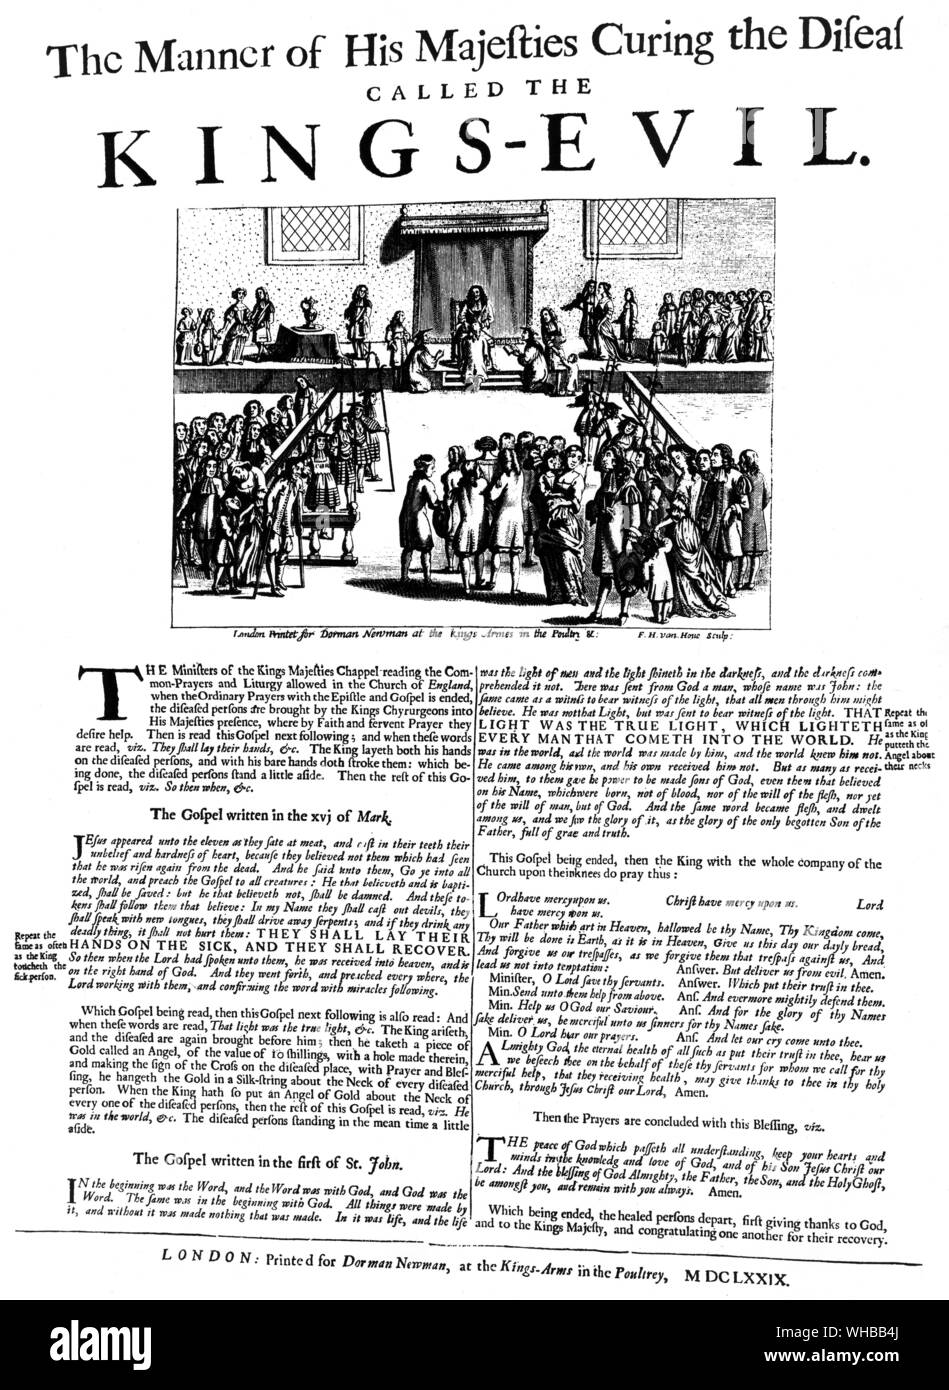 Published in 1679 (MDCLXXIX) - The manner of His Majesties Curing the Disease called the Kings-Evil - the ministers of the Kings Majesties Chapel reading the common prayers and liturgy allowed in the Church of England when the ordinary prayers with the epistle and gospel is ended. The diseased persons are brought by the king's surgeons into his Majesty's presence, where by faith and fervent prayer they desire help.. Stock Photo